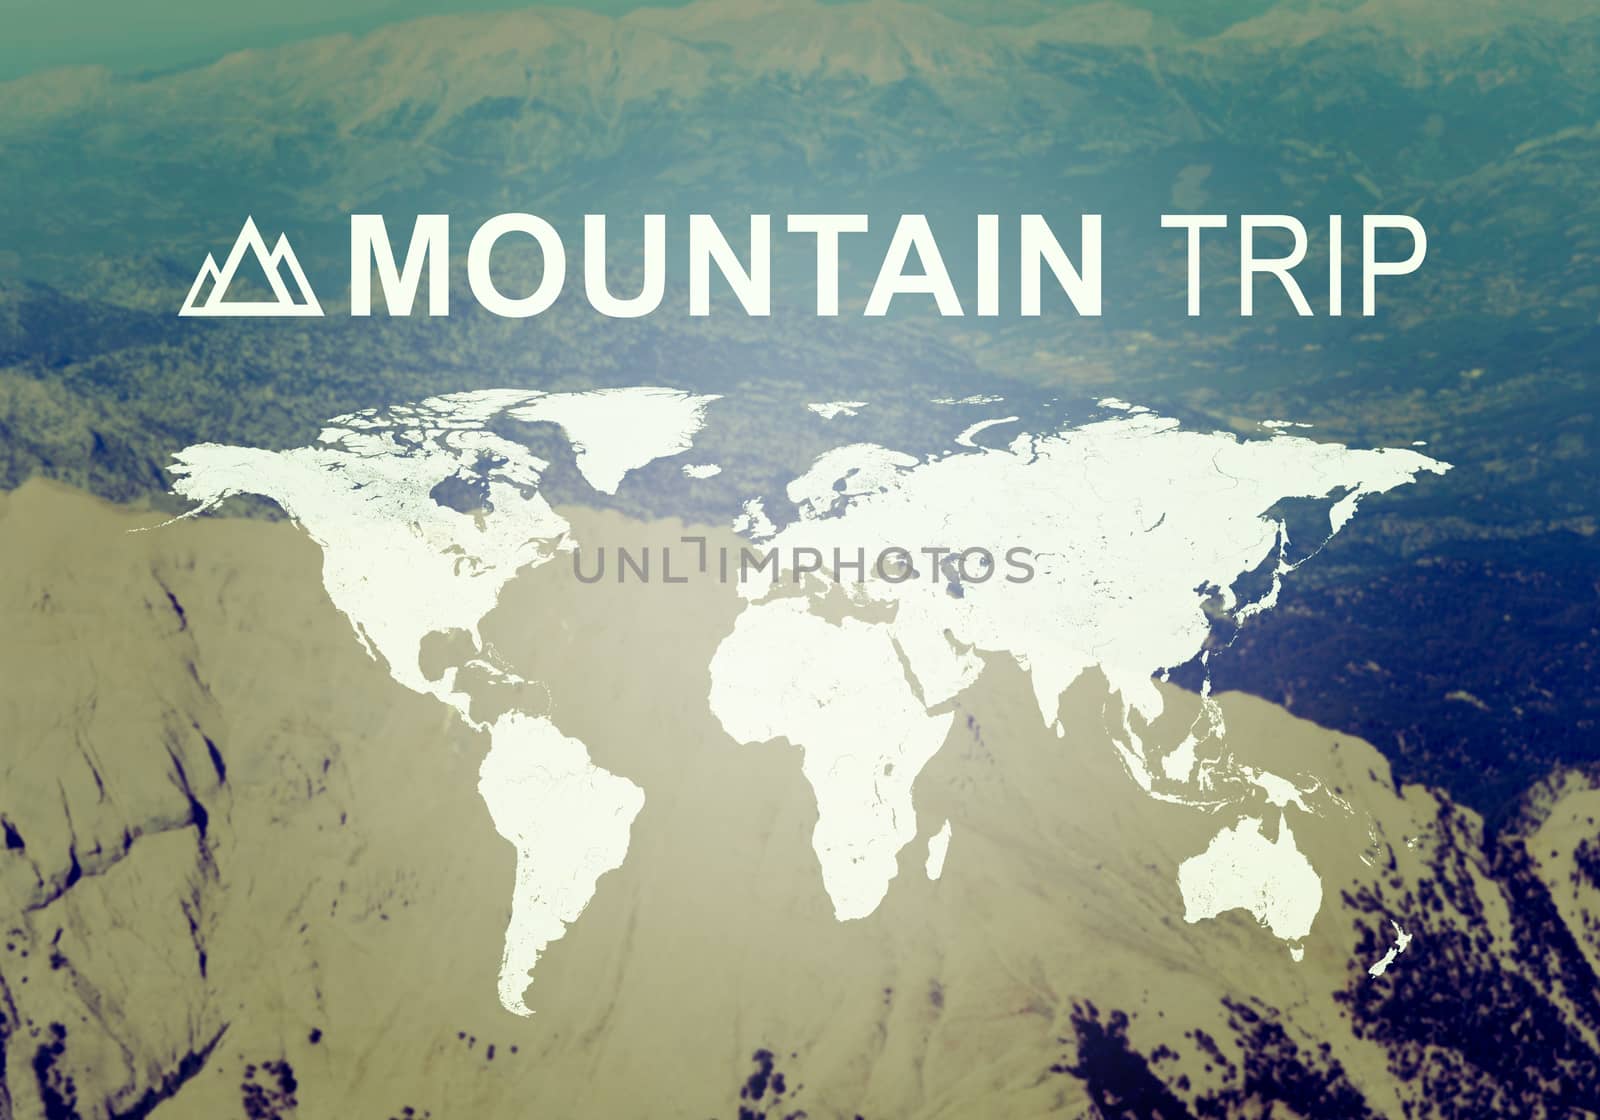 Contoured map of world continents with inscription Mountain Trip. Aerial view of  mountainous desert terrain as backdrop